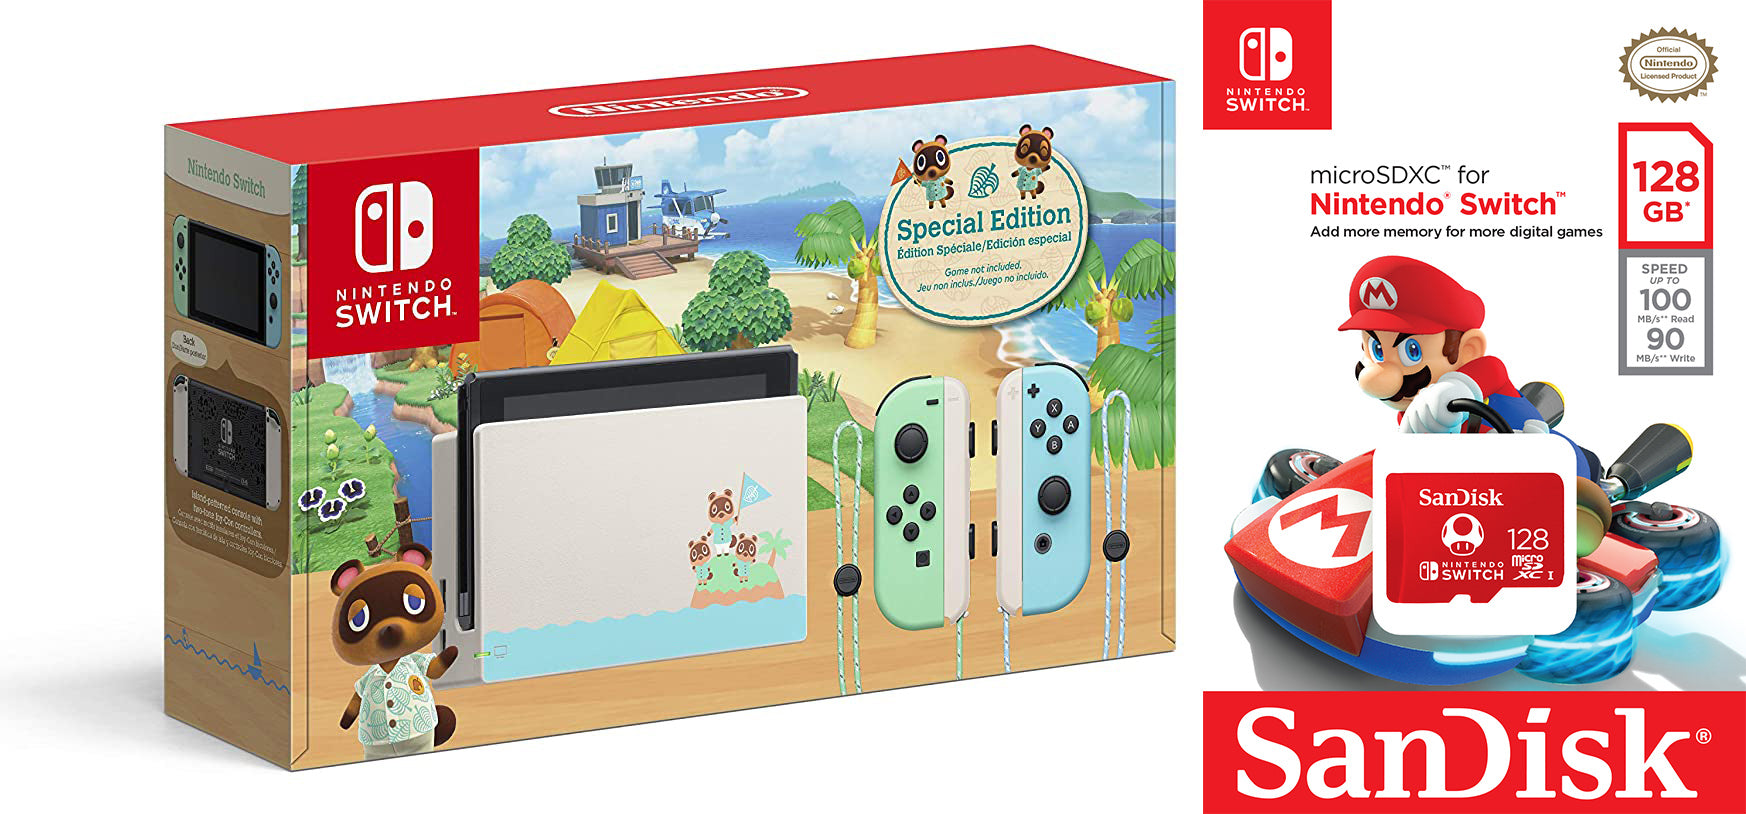 Nintendo Switch Animal Crossing: New Horizons Edition with Sandisk 128GB MicroSD Card - Pro-Distributing